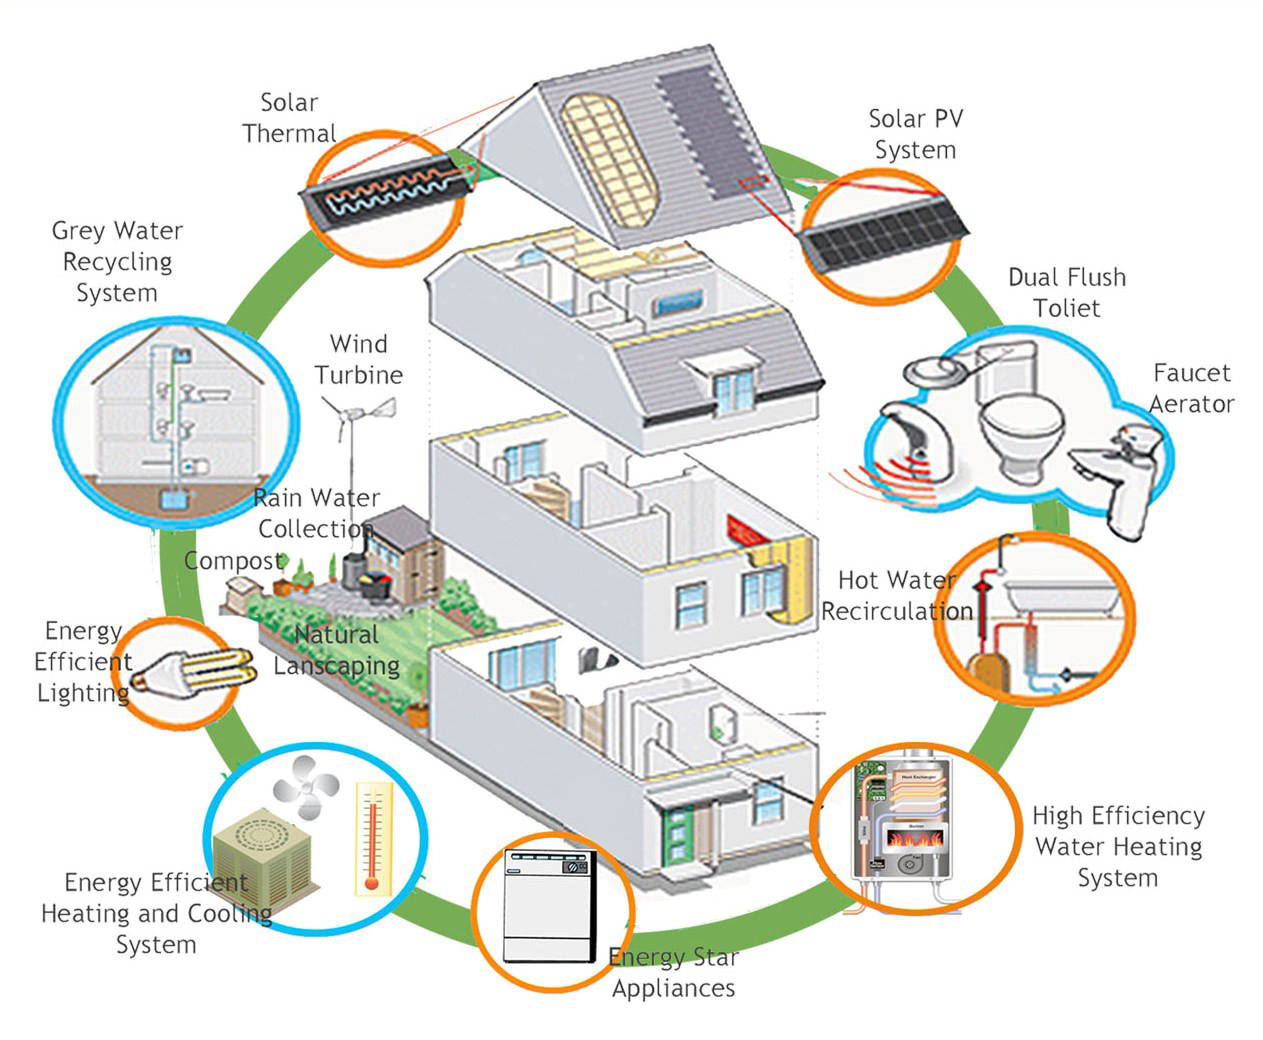 Clean Technologies For Cooling And Heating Your Home - Green Living Ideas